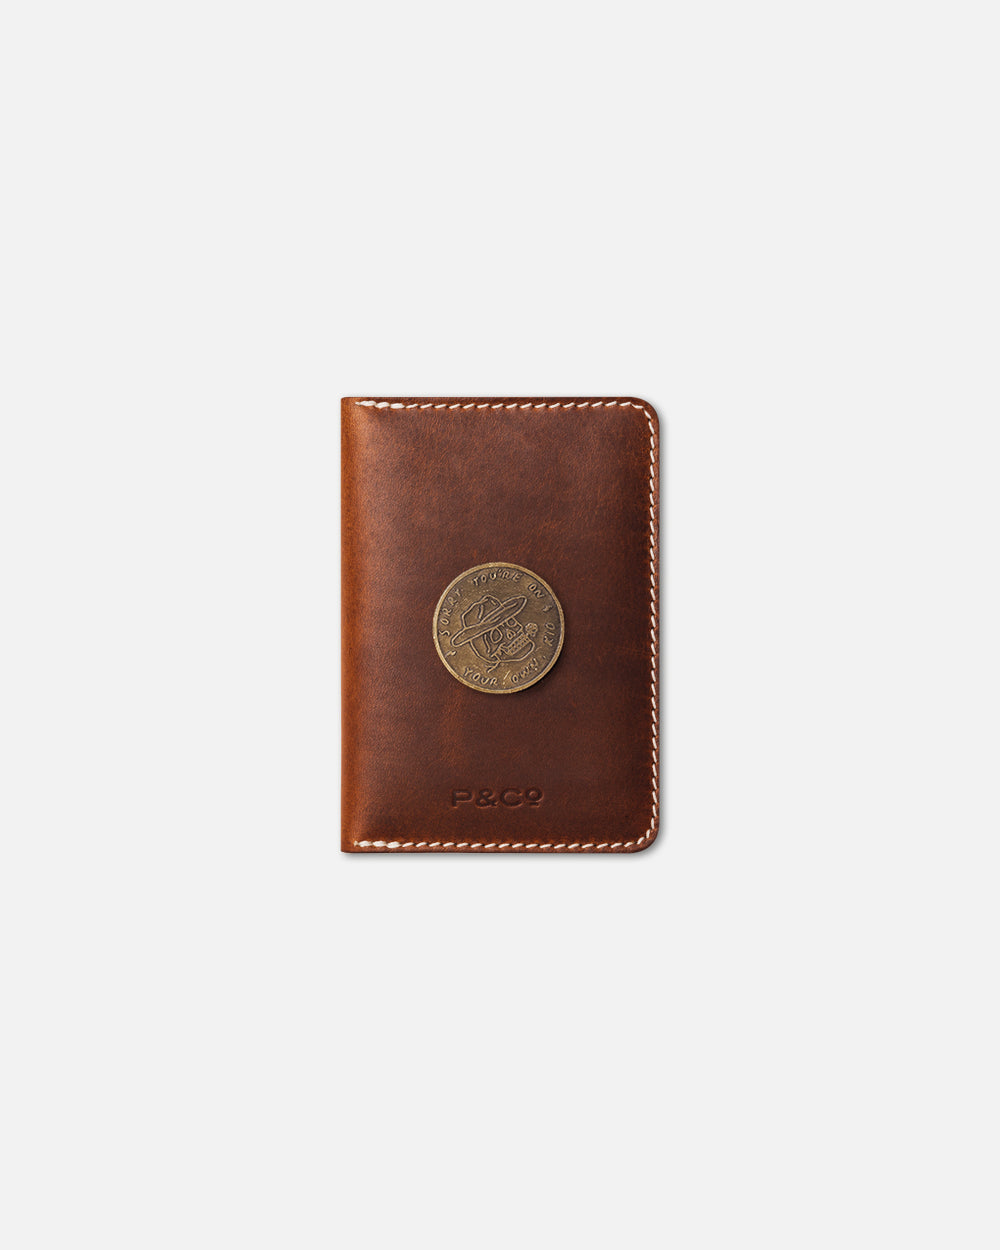 Good At Bad Decisions Leather Wallet